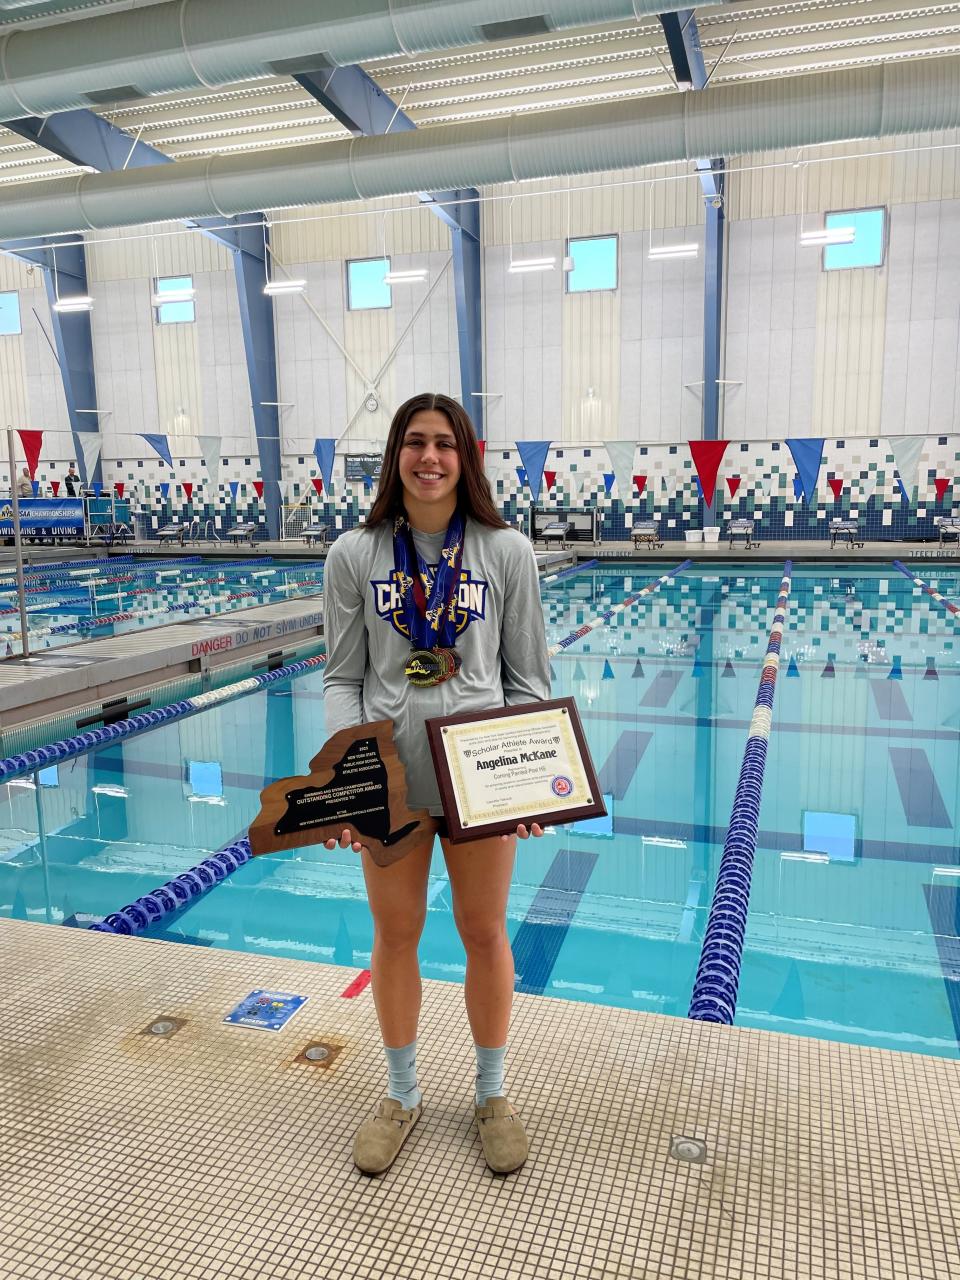 Corning's Angie McKane won the Outstanding Competitor Award and Scholar Athlete Award at the New York State Girls Swimming and Diving Championships on Nov. 18, 2023 at the Webster Aquatic Center.